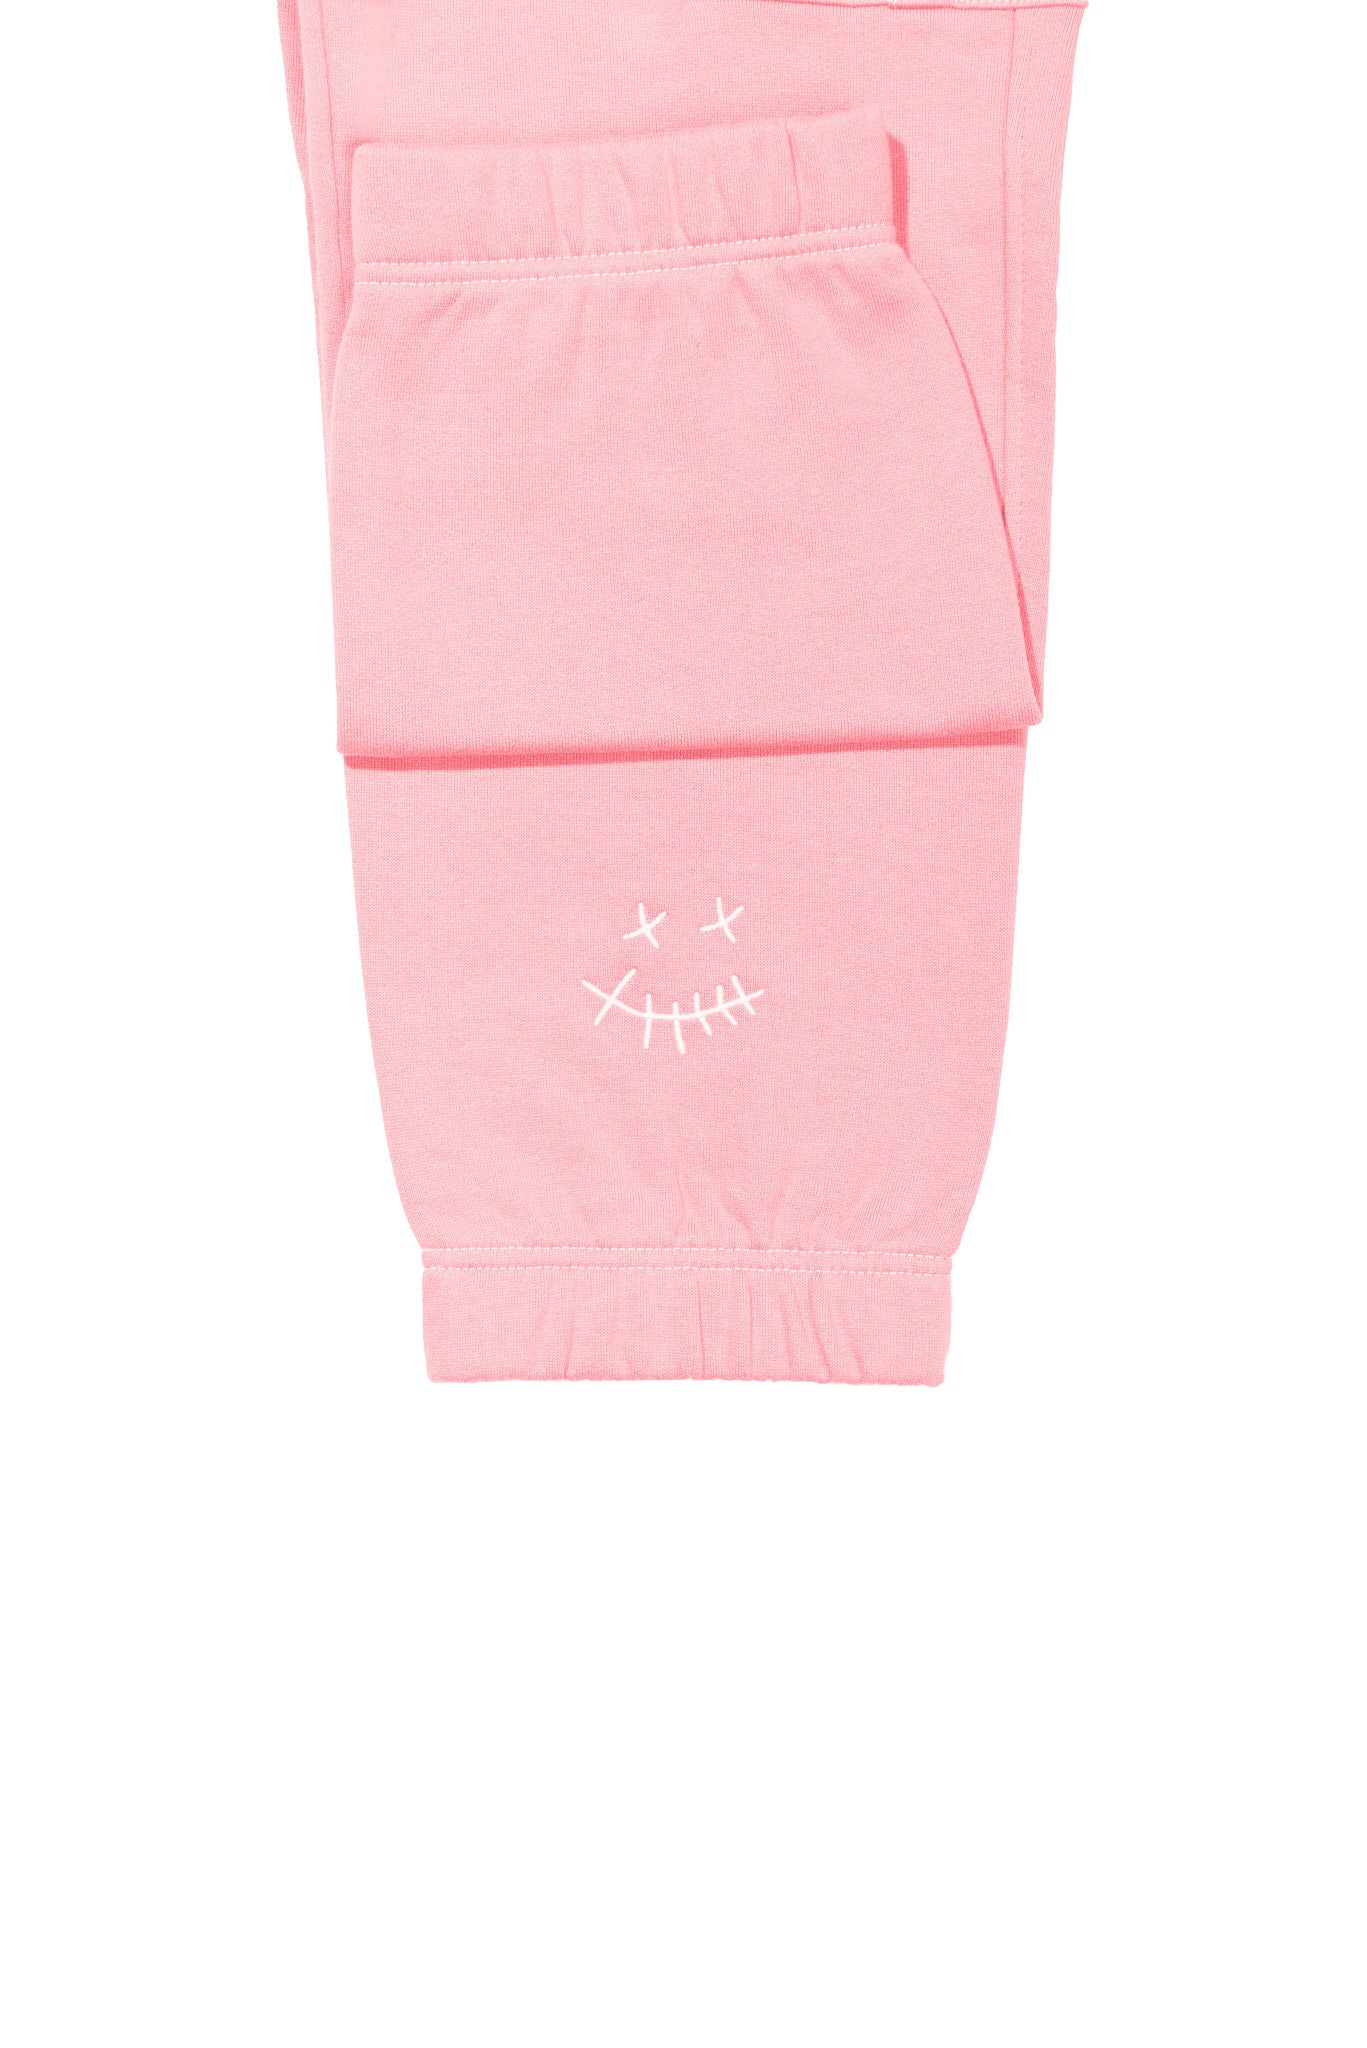 *SALE* TILL FOREVER TRACKPANTS (CAM'RON PINK)